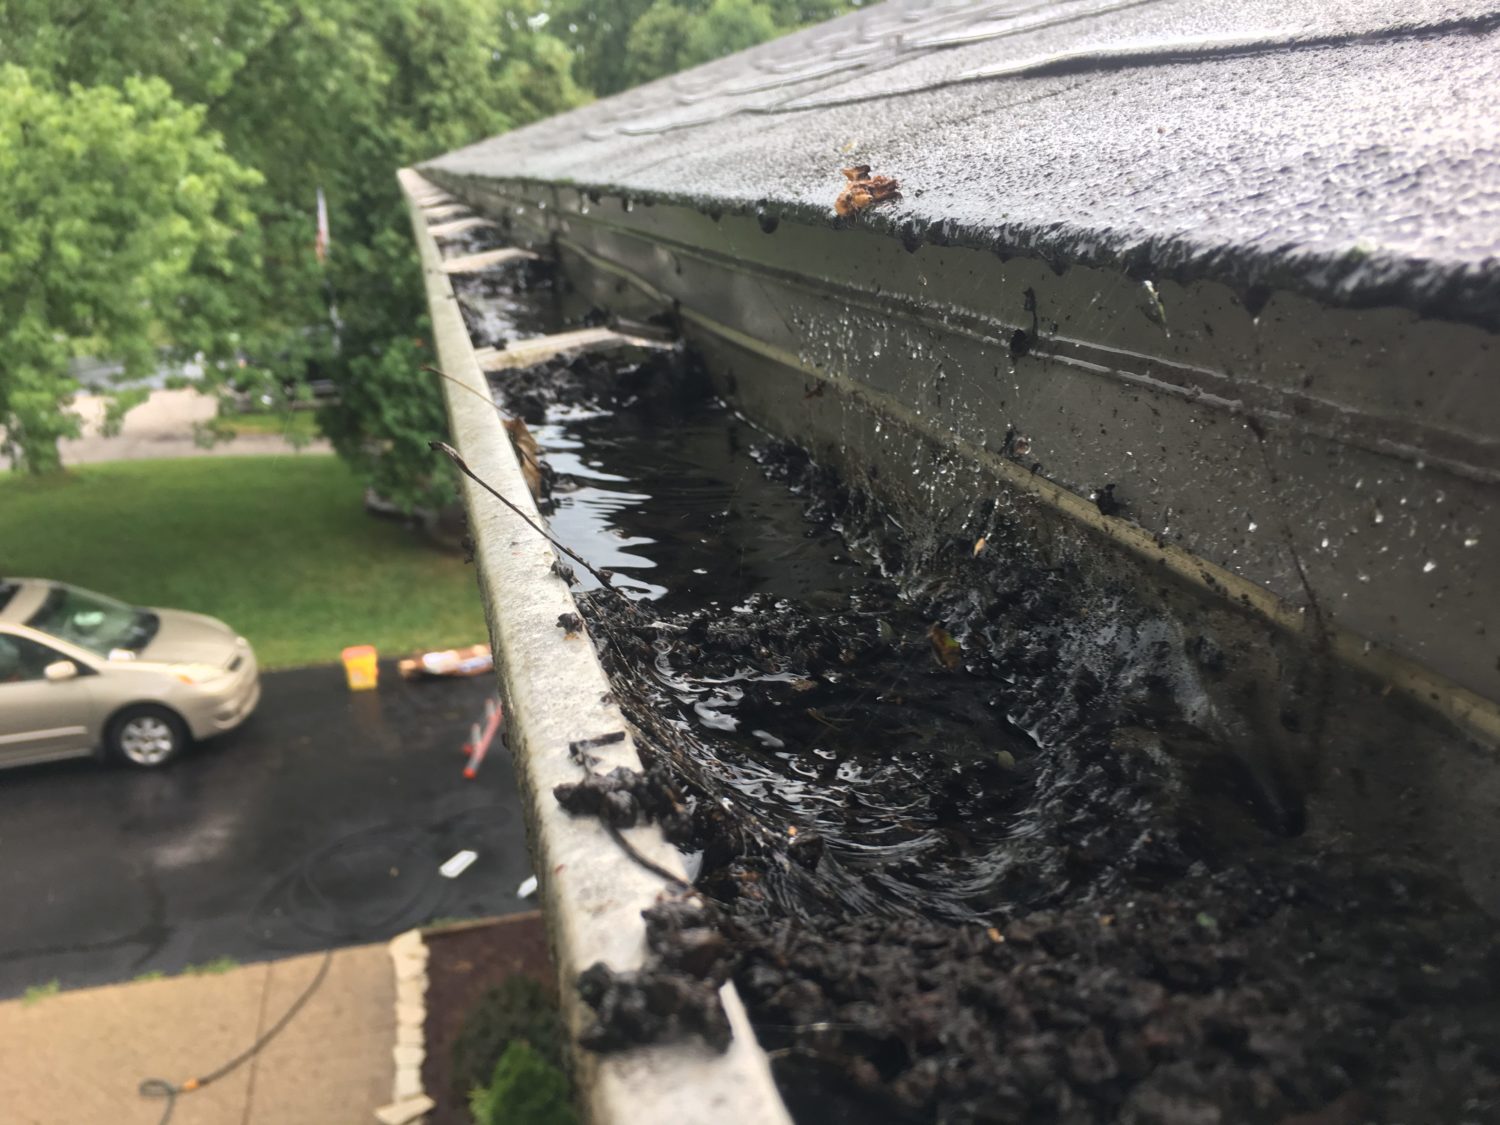 cleaning gutter screens